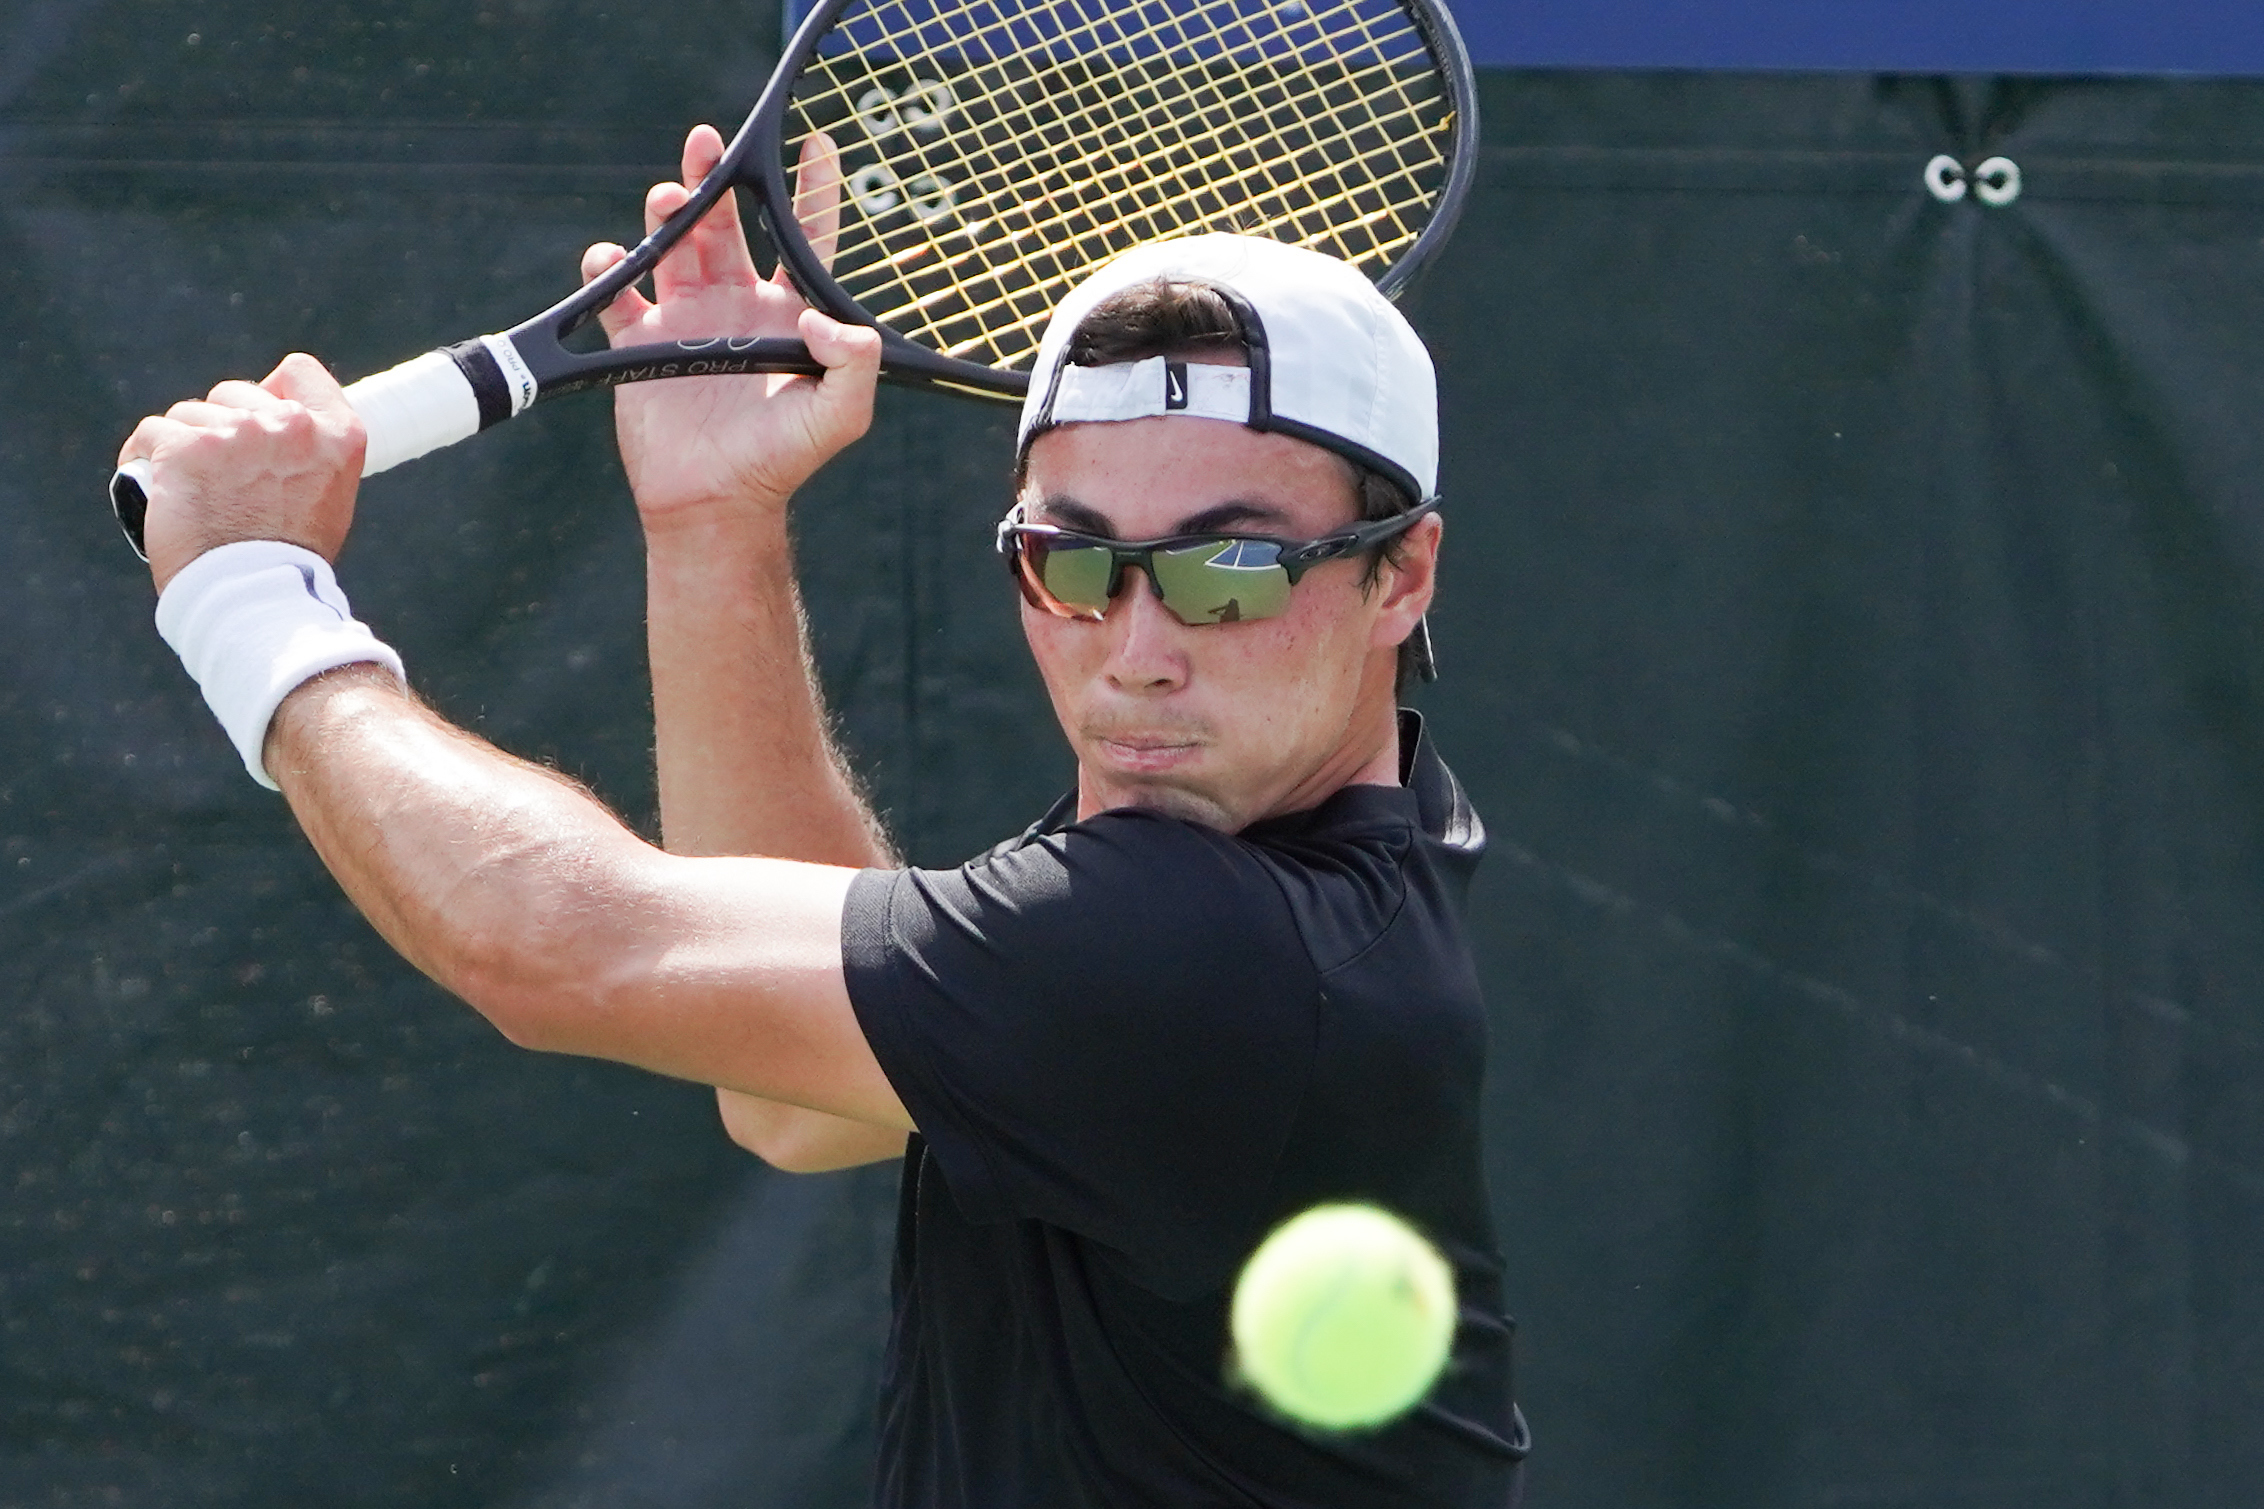 Canadians Boulais Martin Qualify For Main Draw At Atp Challenger In Granby Granby National